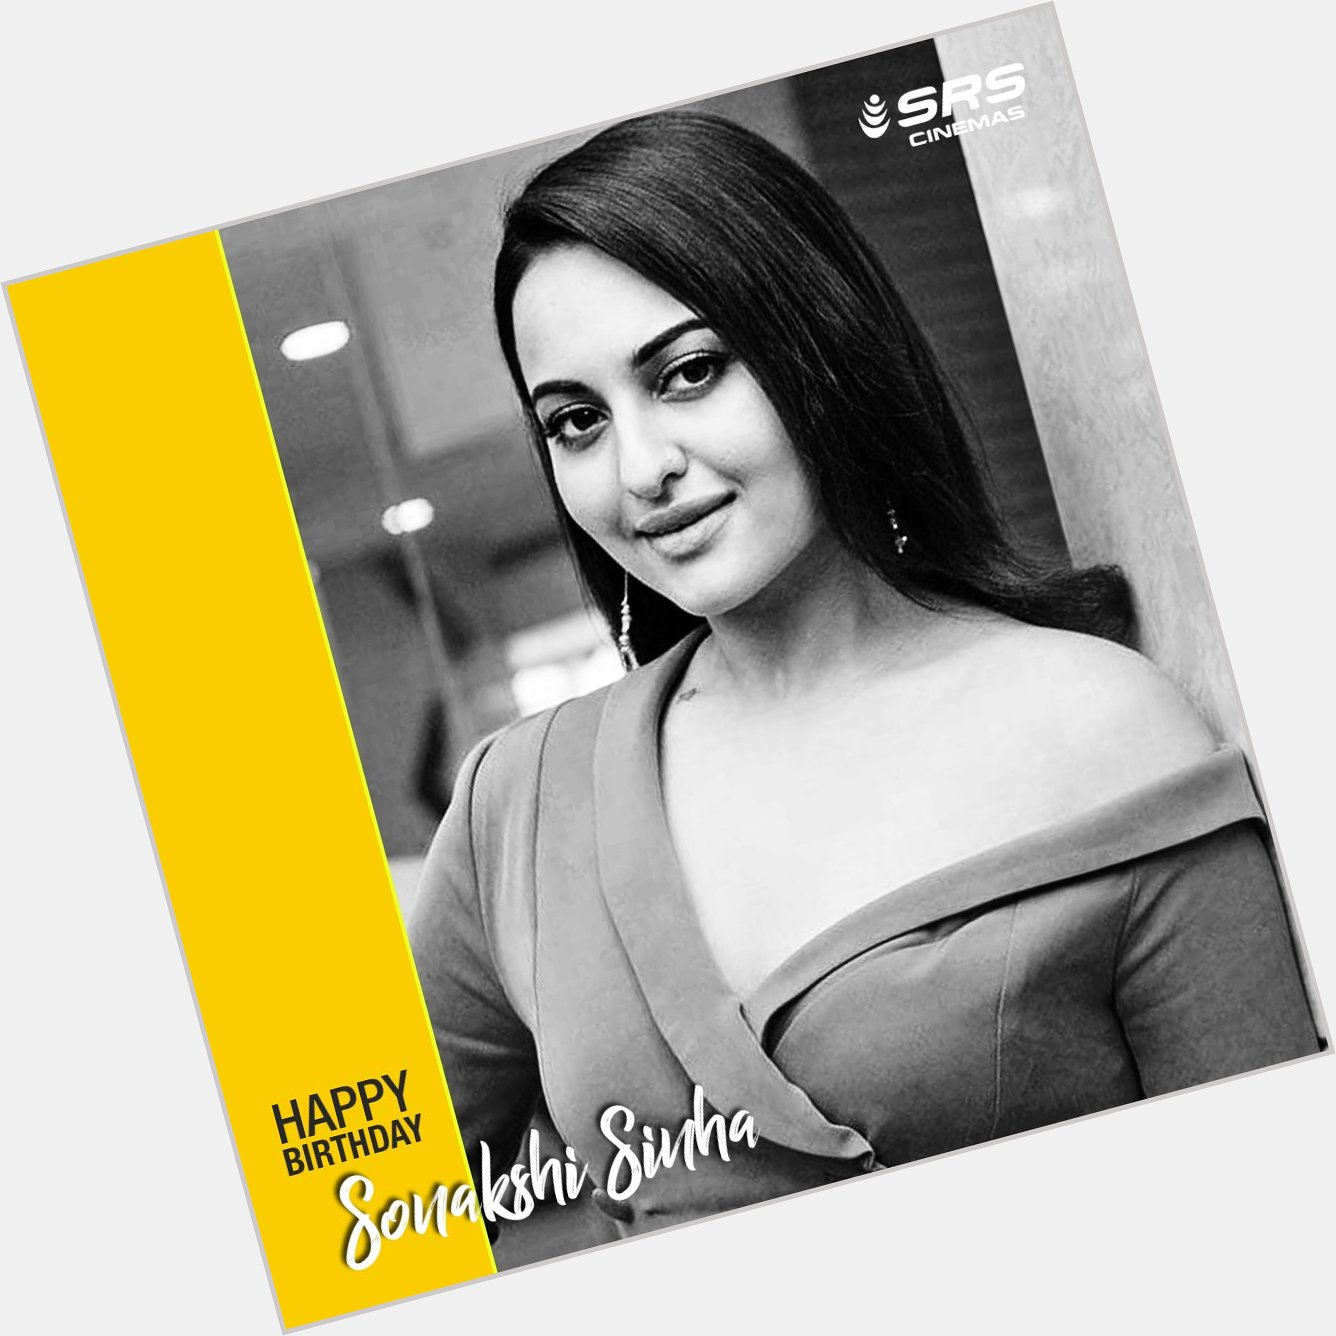 A very happy birthday to the stunning and talented Sonakshi Sinha! 